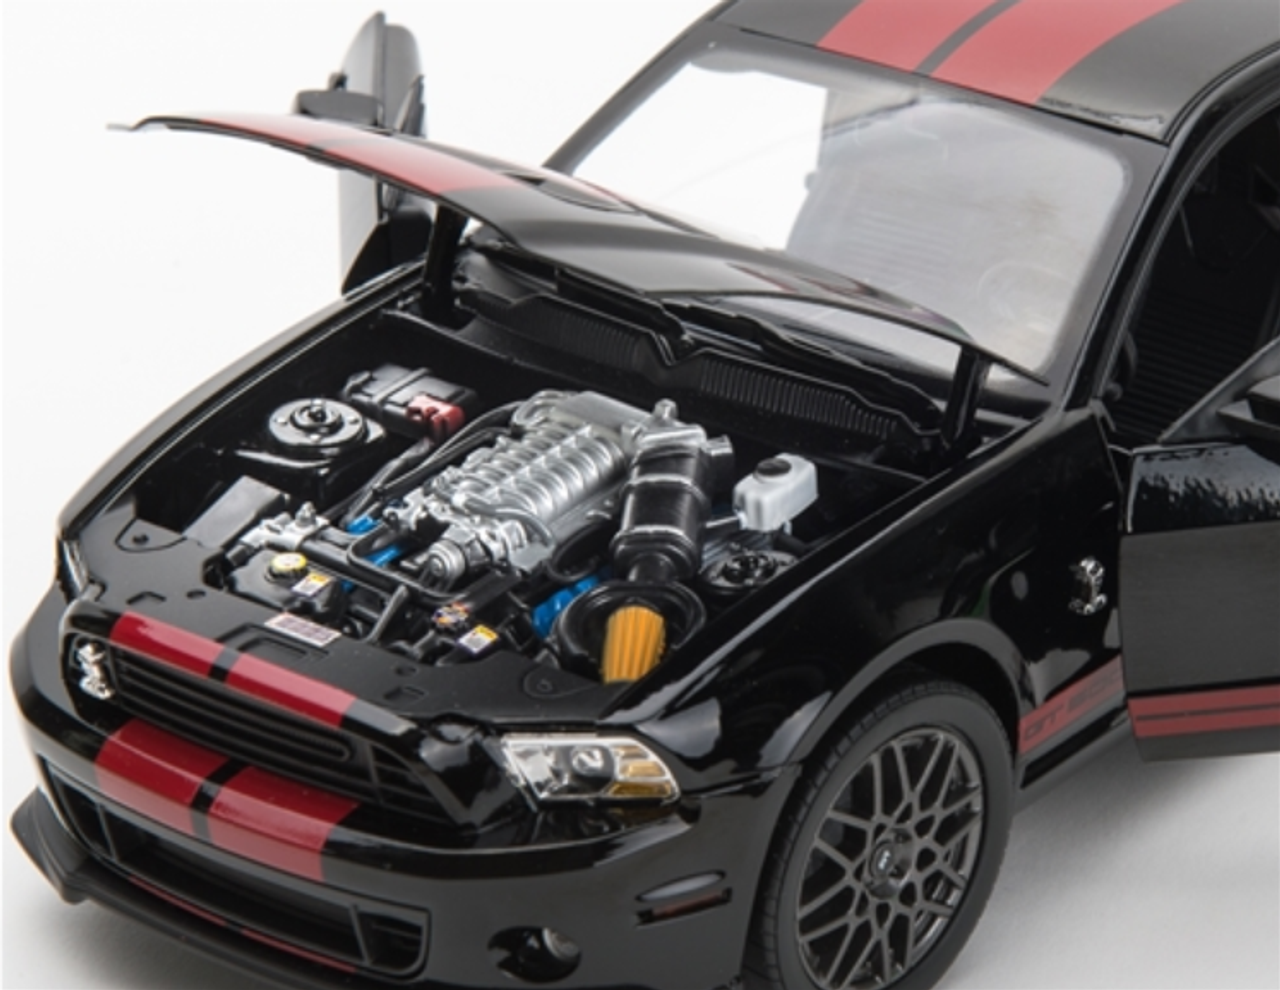 1/18 Shelby Collectibles 2013 Ford Shelby GT500 (Black with Red Stripes) Diecast Car Model